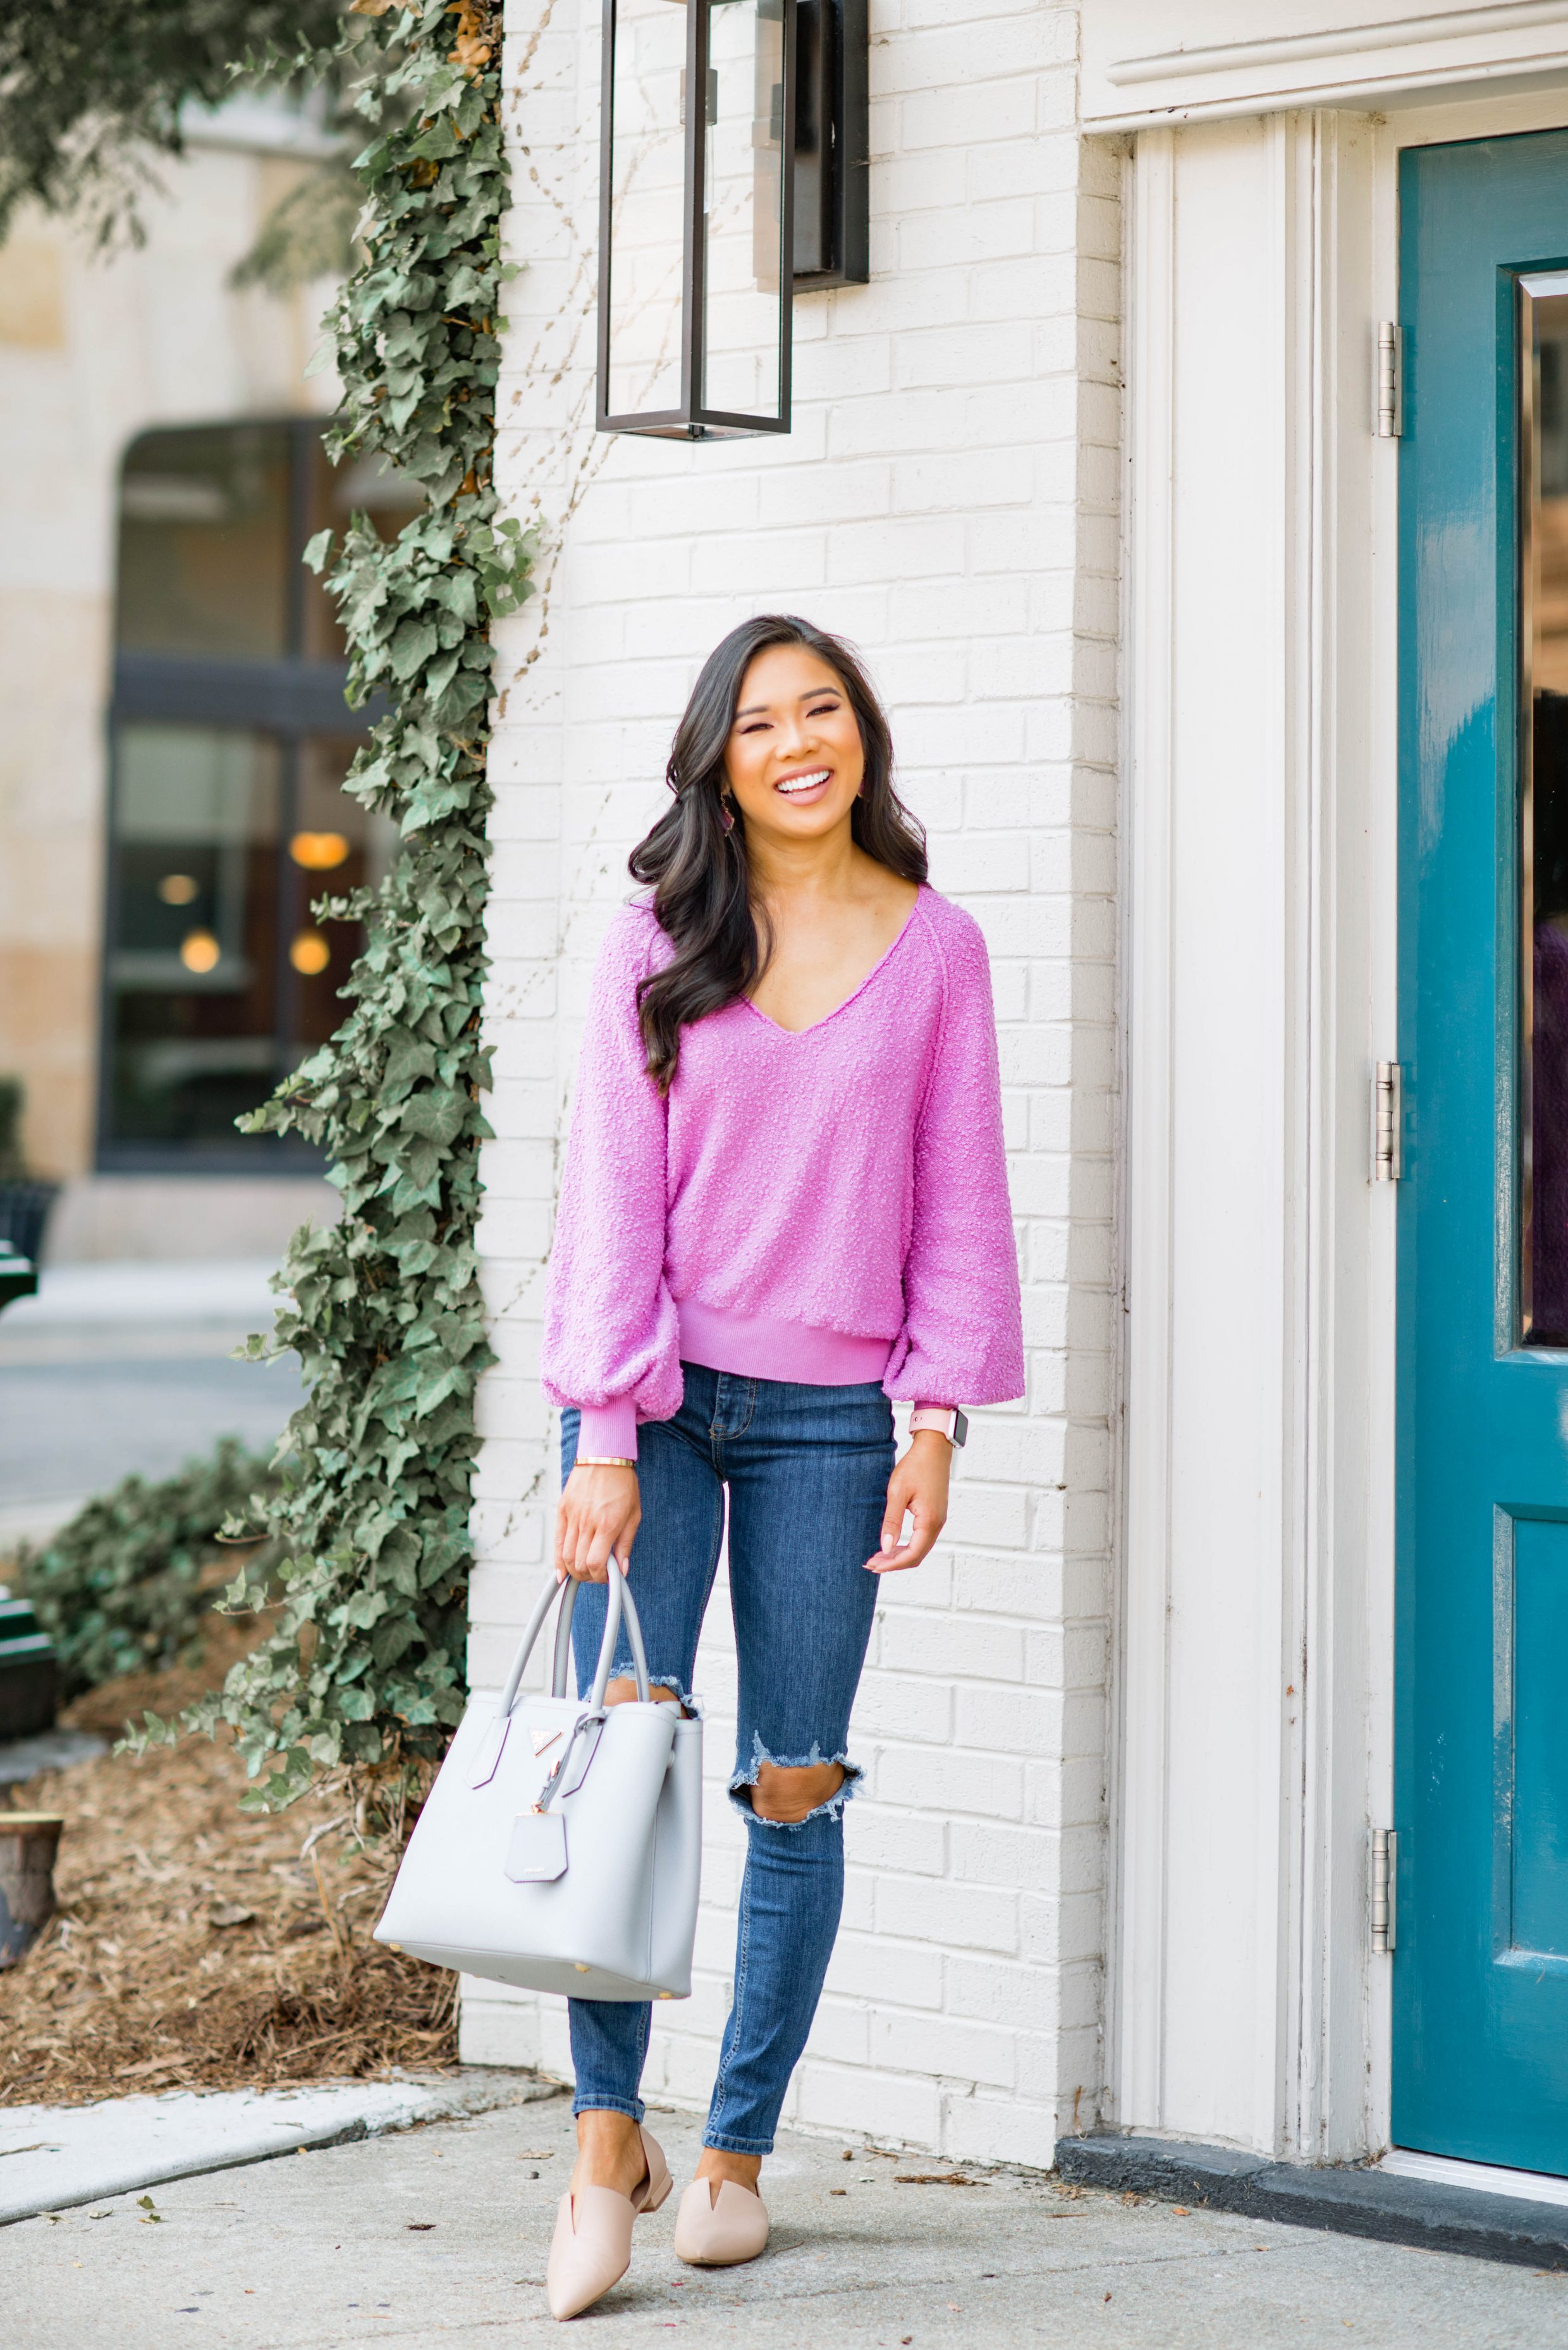 Hoang-Kim wears an easy fall outfit idea with slouchy balloon sleeve sweater, jeans and d'orsay nude flats